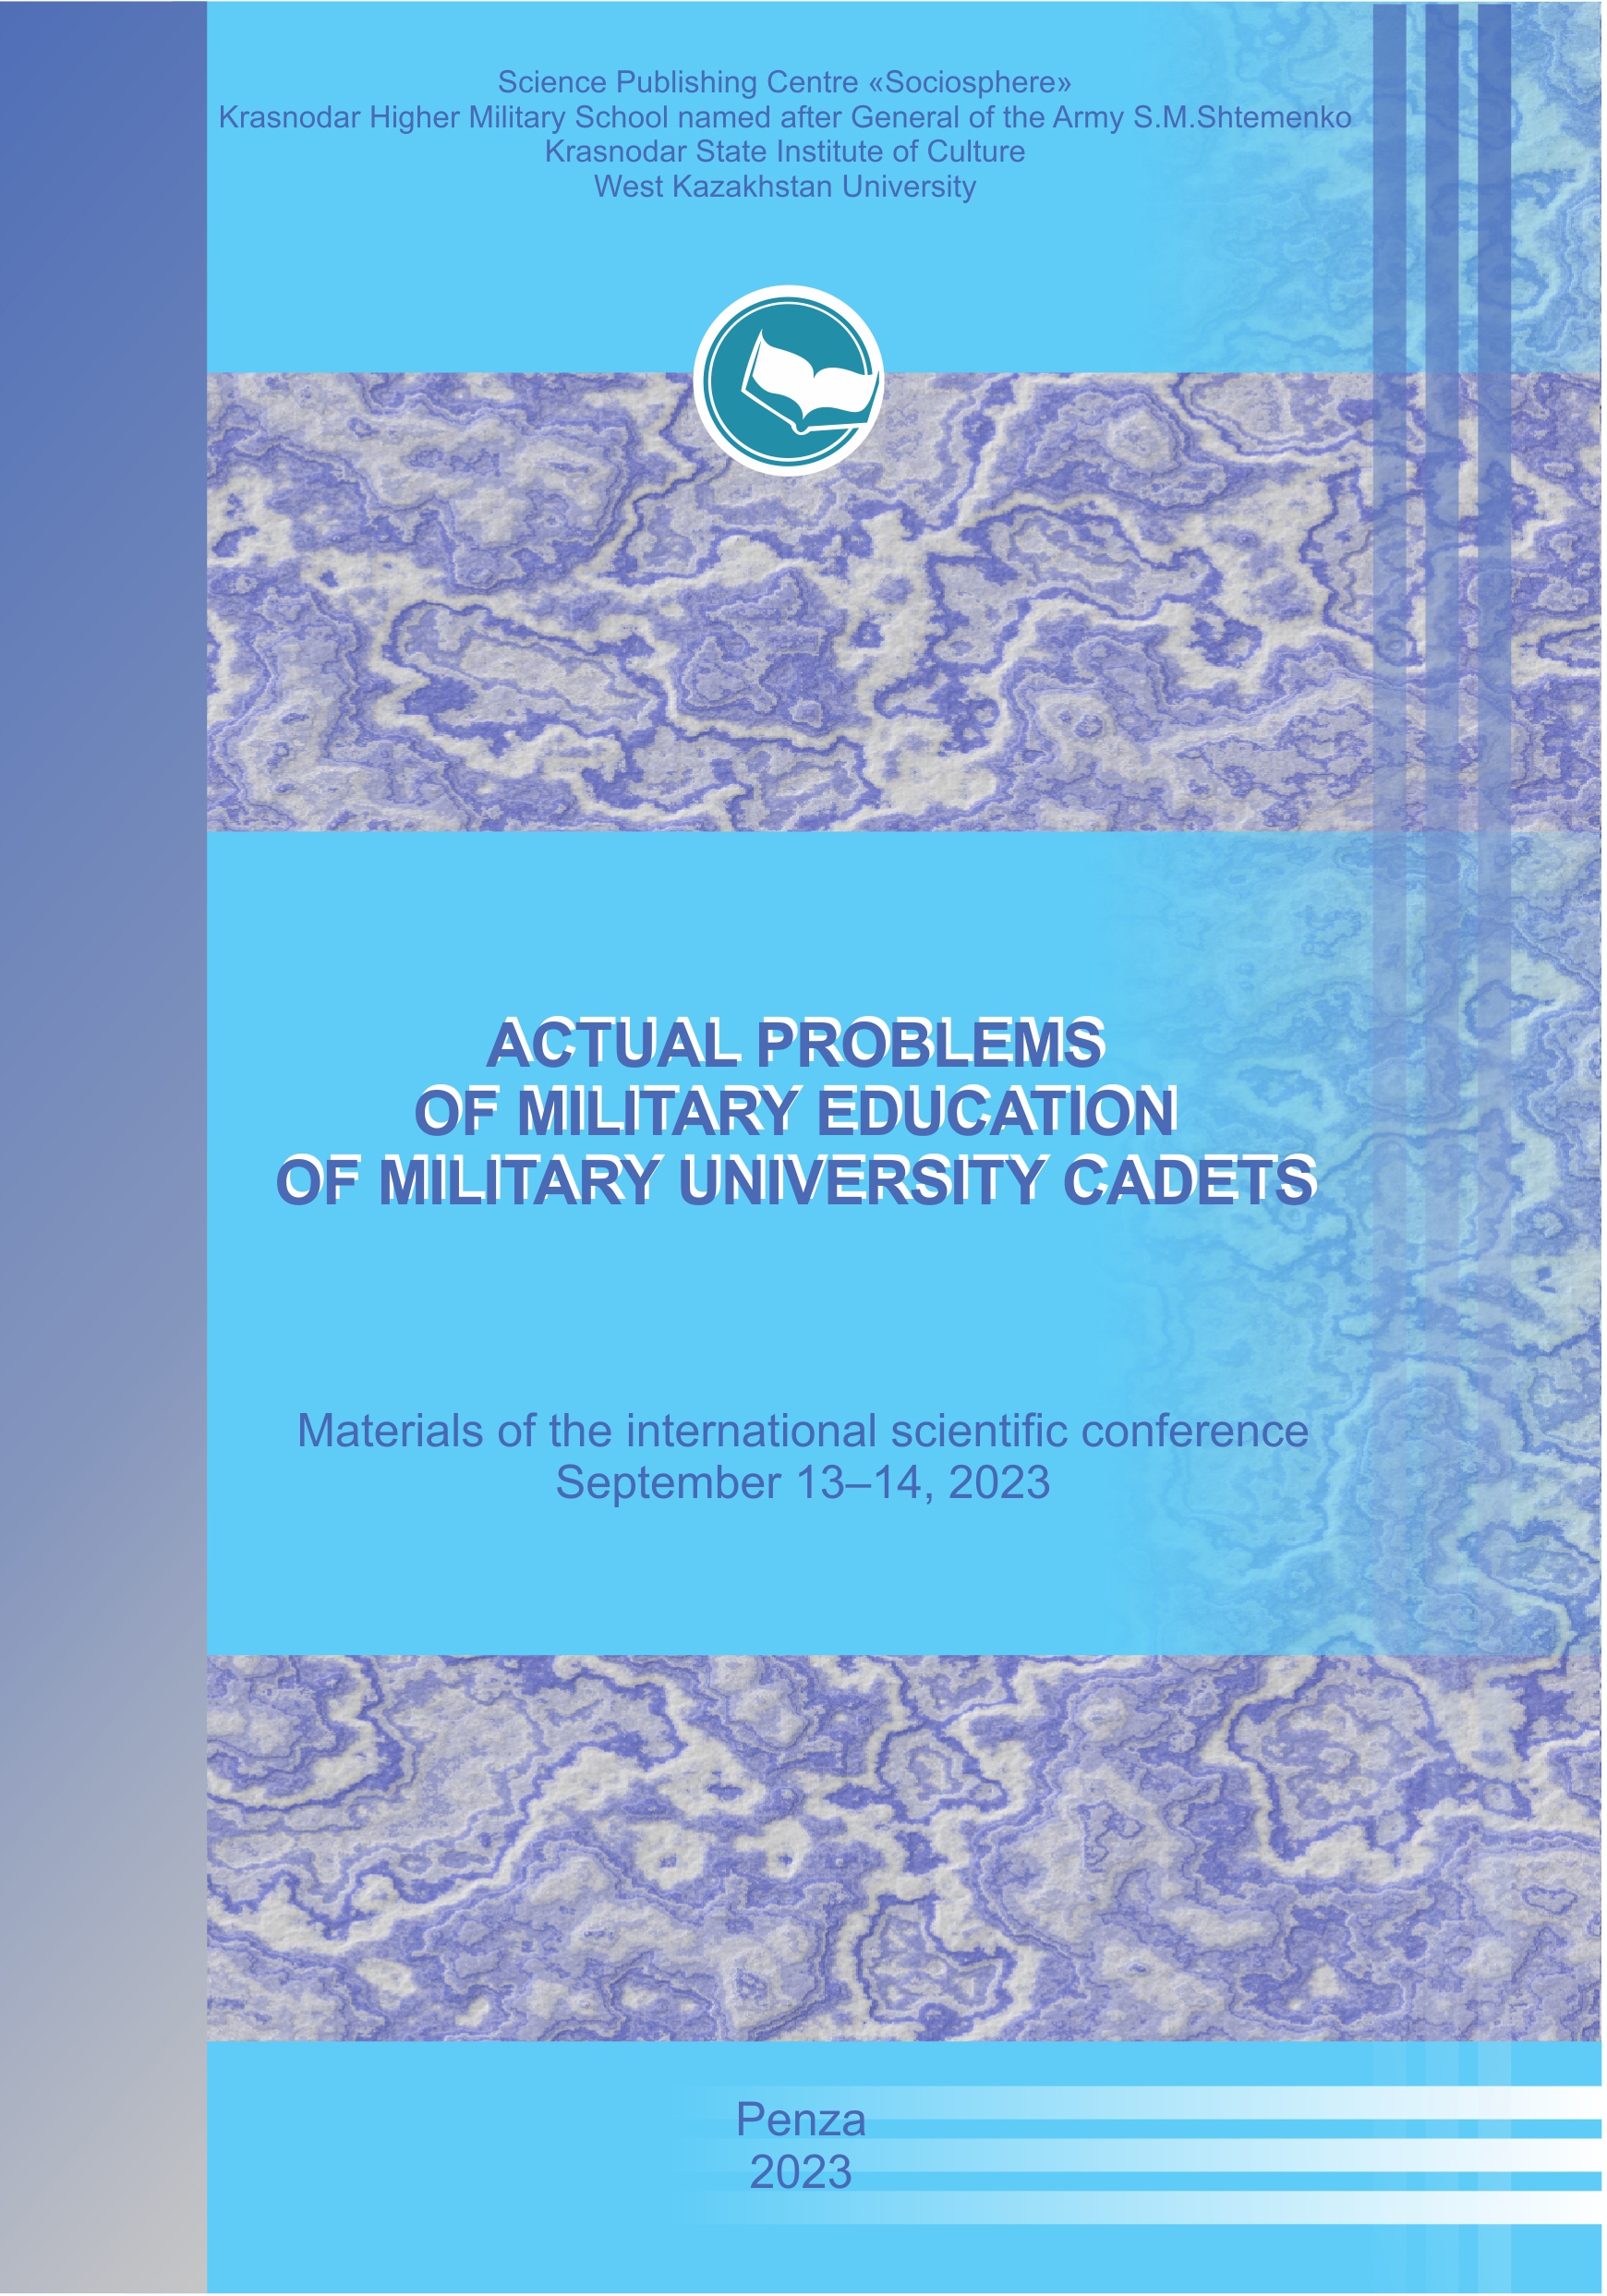 Actual problems of military education of military university cadets 